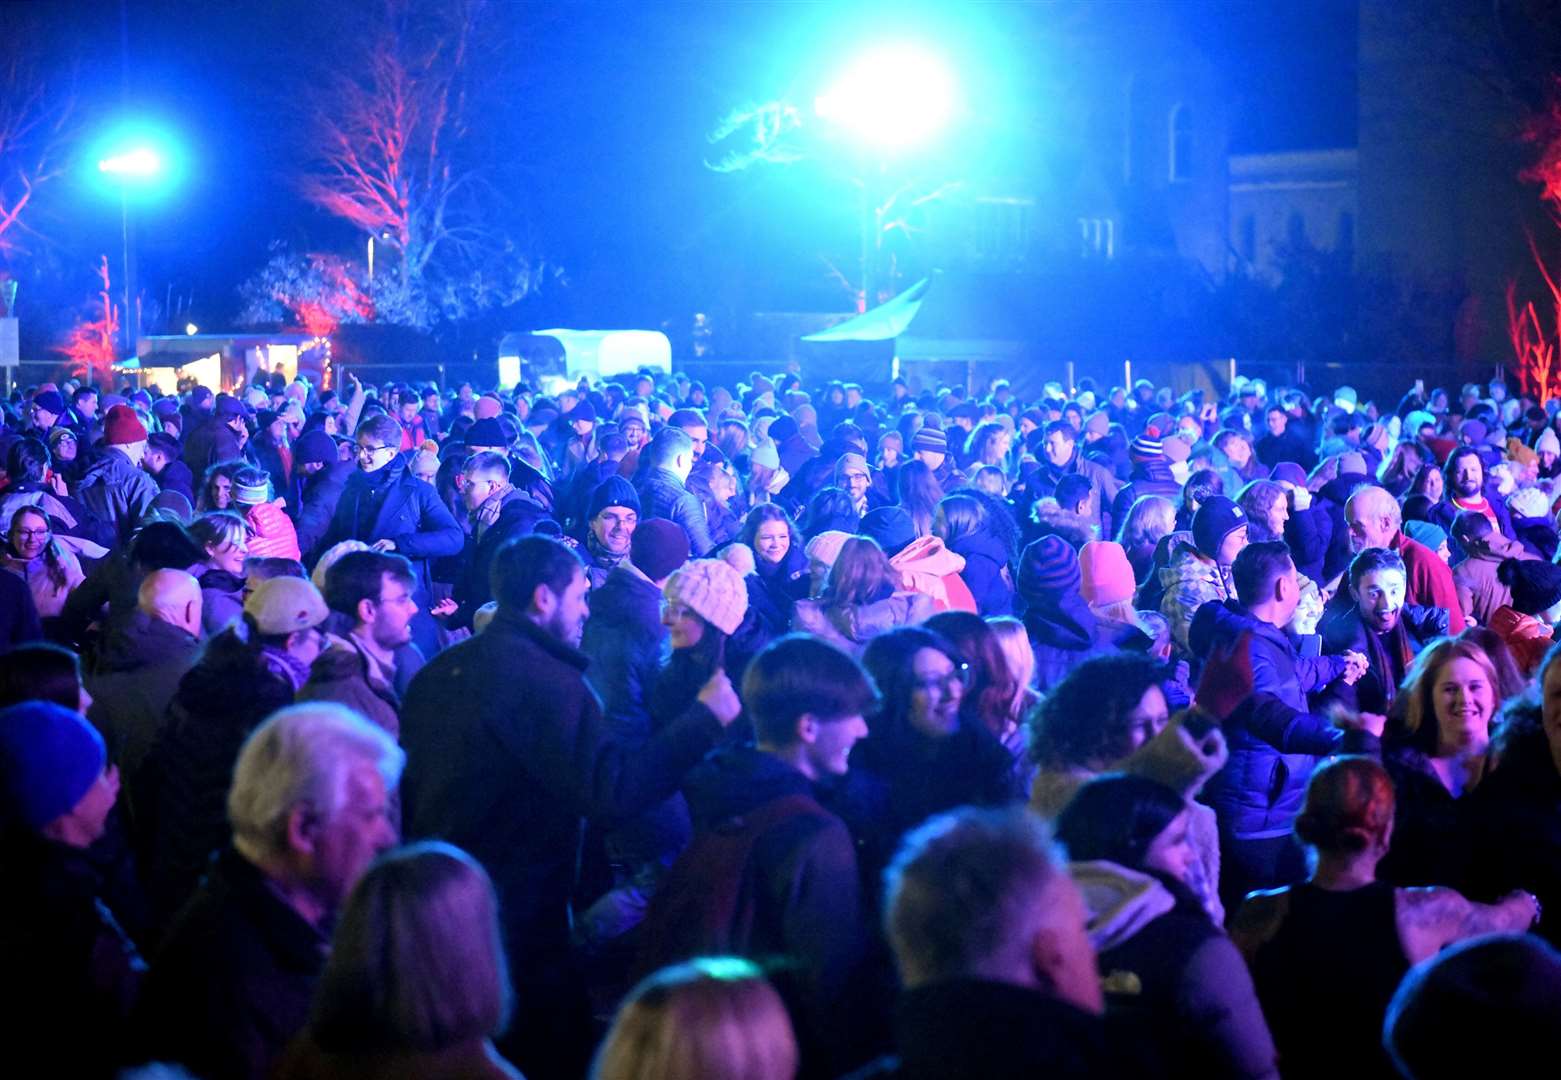 An unexpected surge in ticket sales at Inverness's Hogmanay led to some unhappy punters.